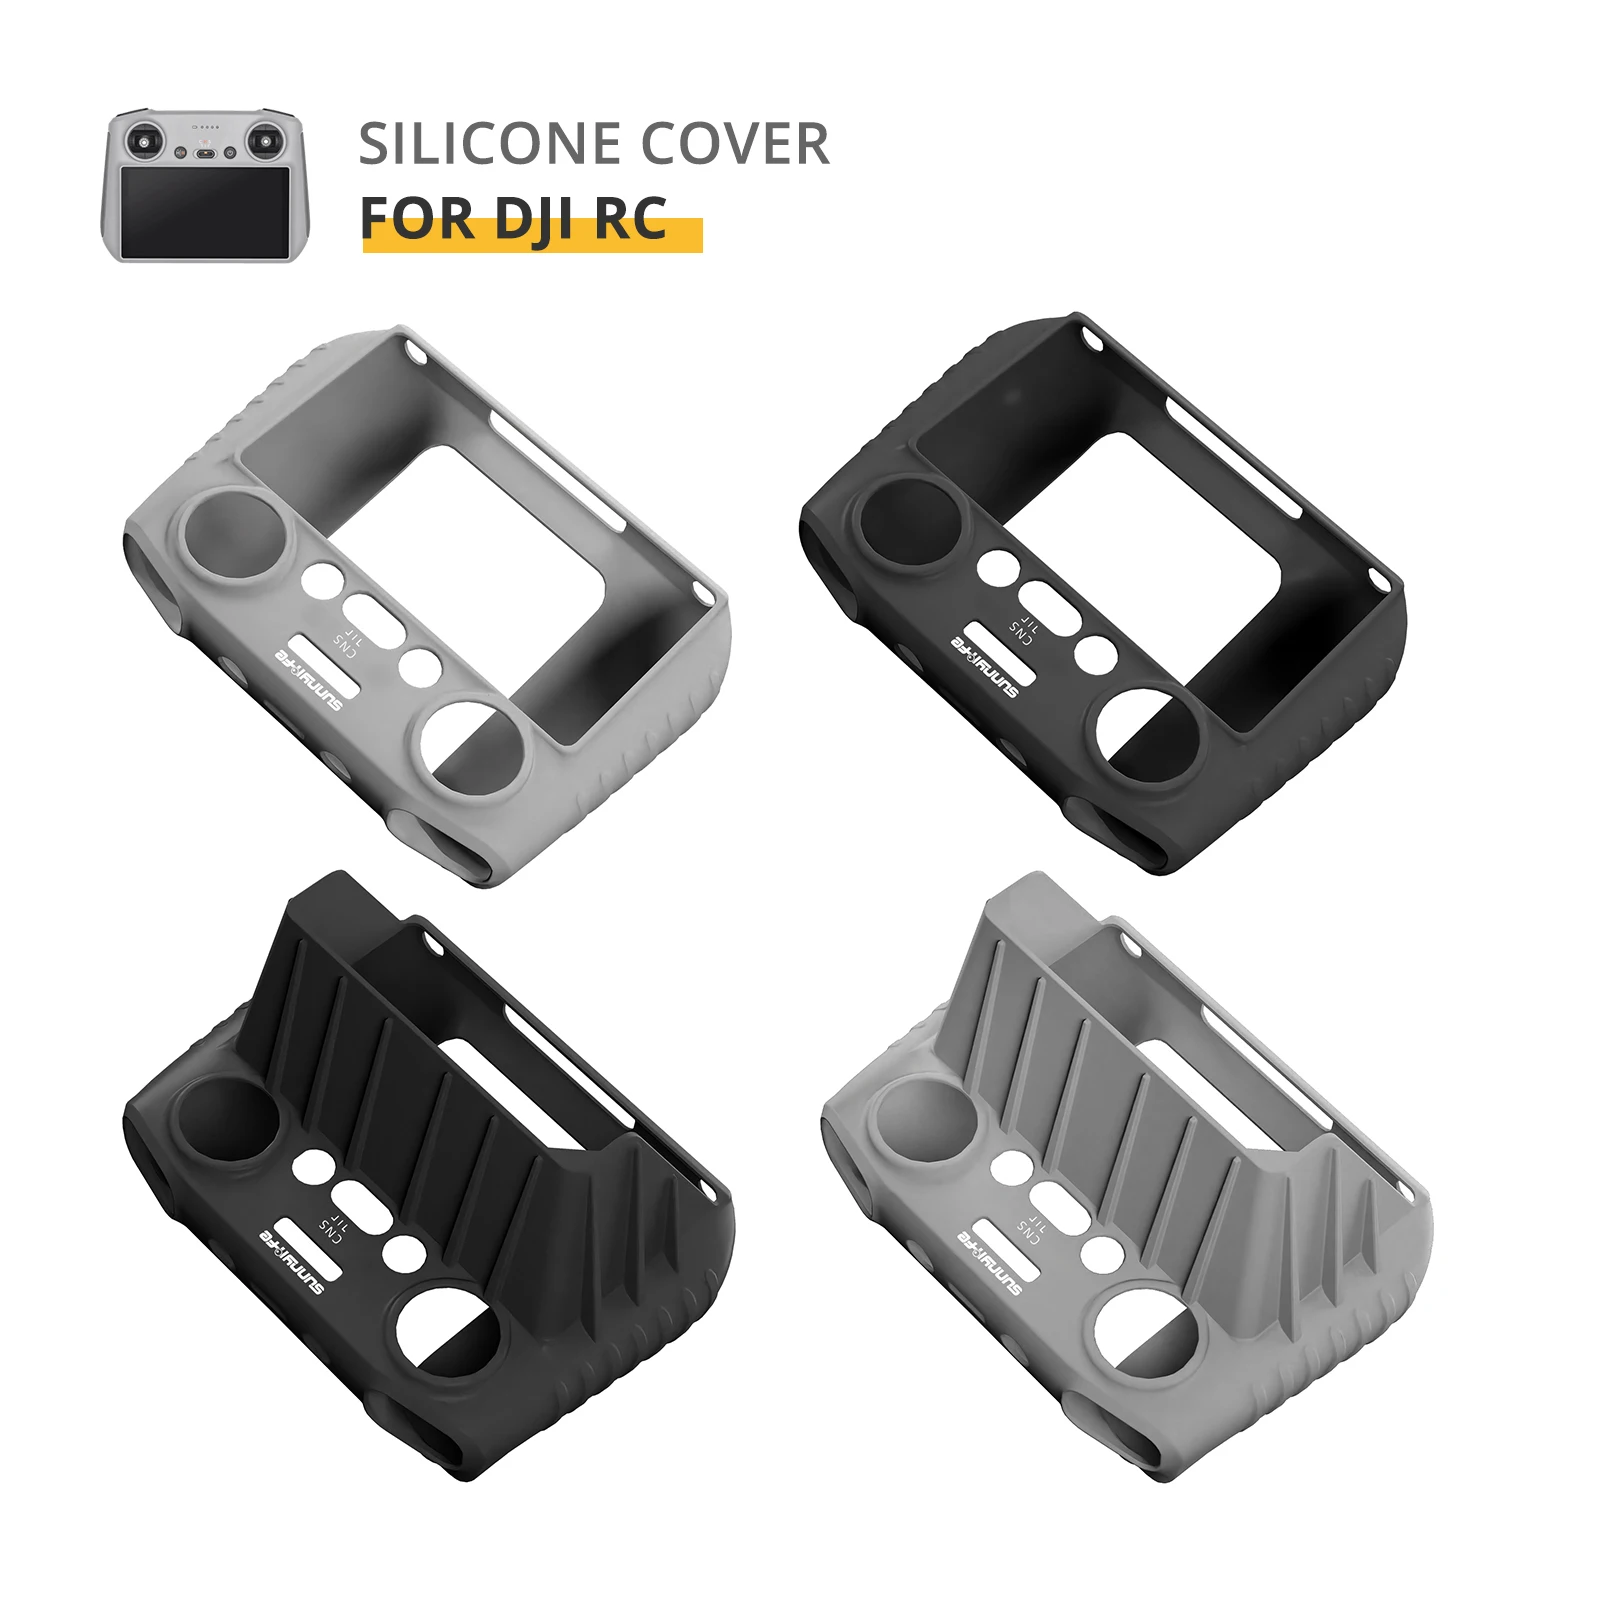 Купи Silicone Case For DJI RC Remote Control Protective Cover with Sun Shade Hood for DJI Mini 3 Pro RC Smart Controller Accessories за 533 рублей в магазине AliExpress